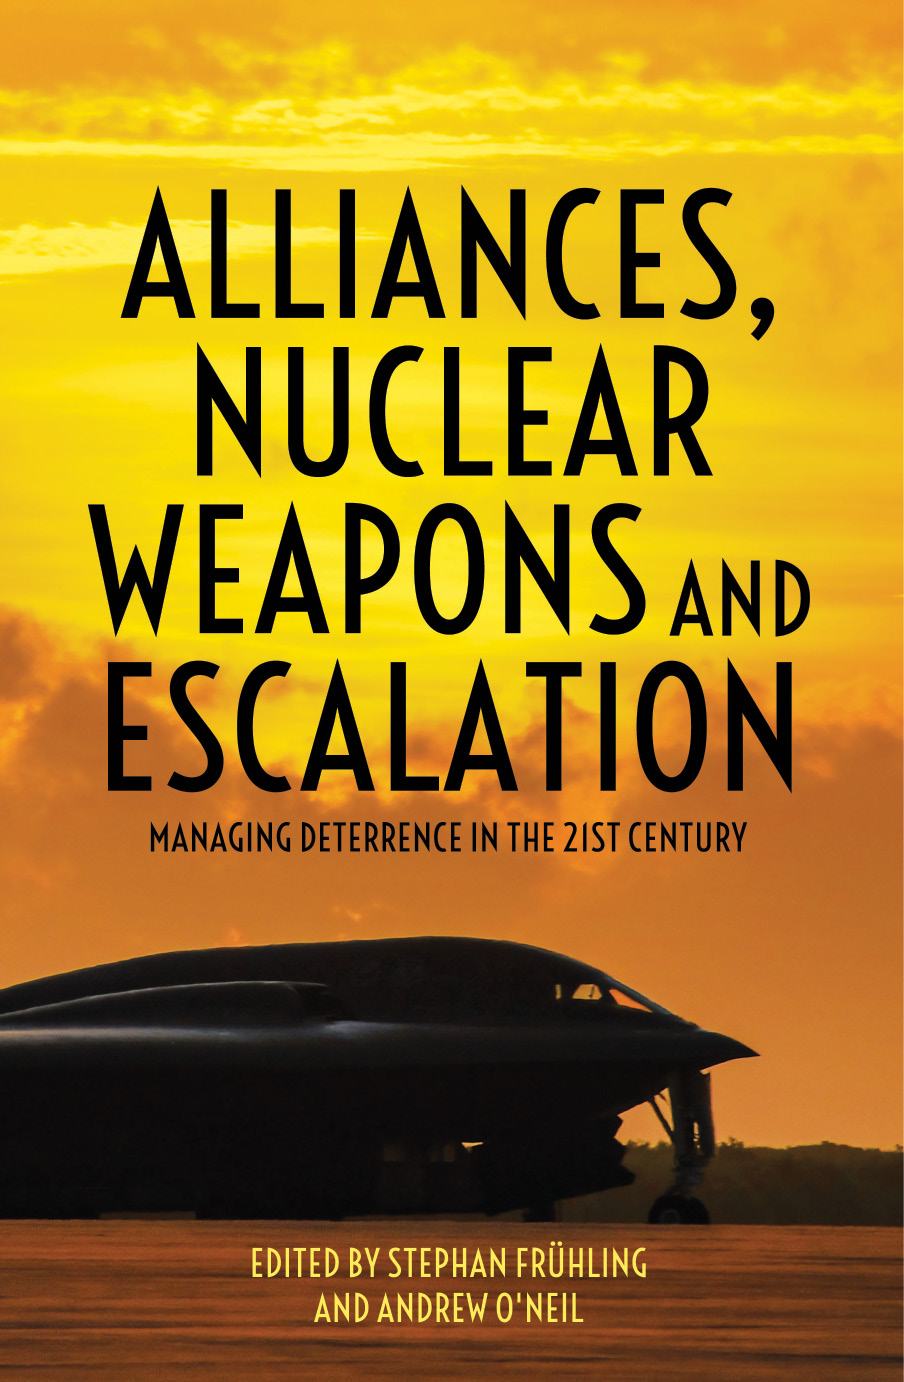 Alliances Nuclear Weapons and Escalation Managing Deterrence in the 21st Century - image 1